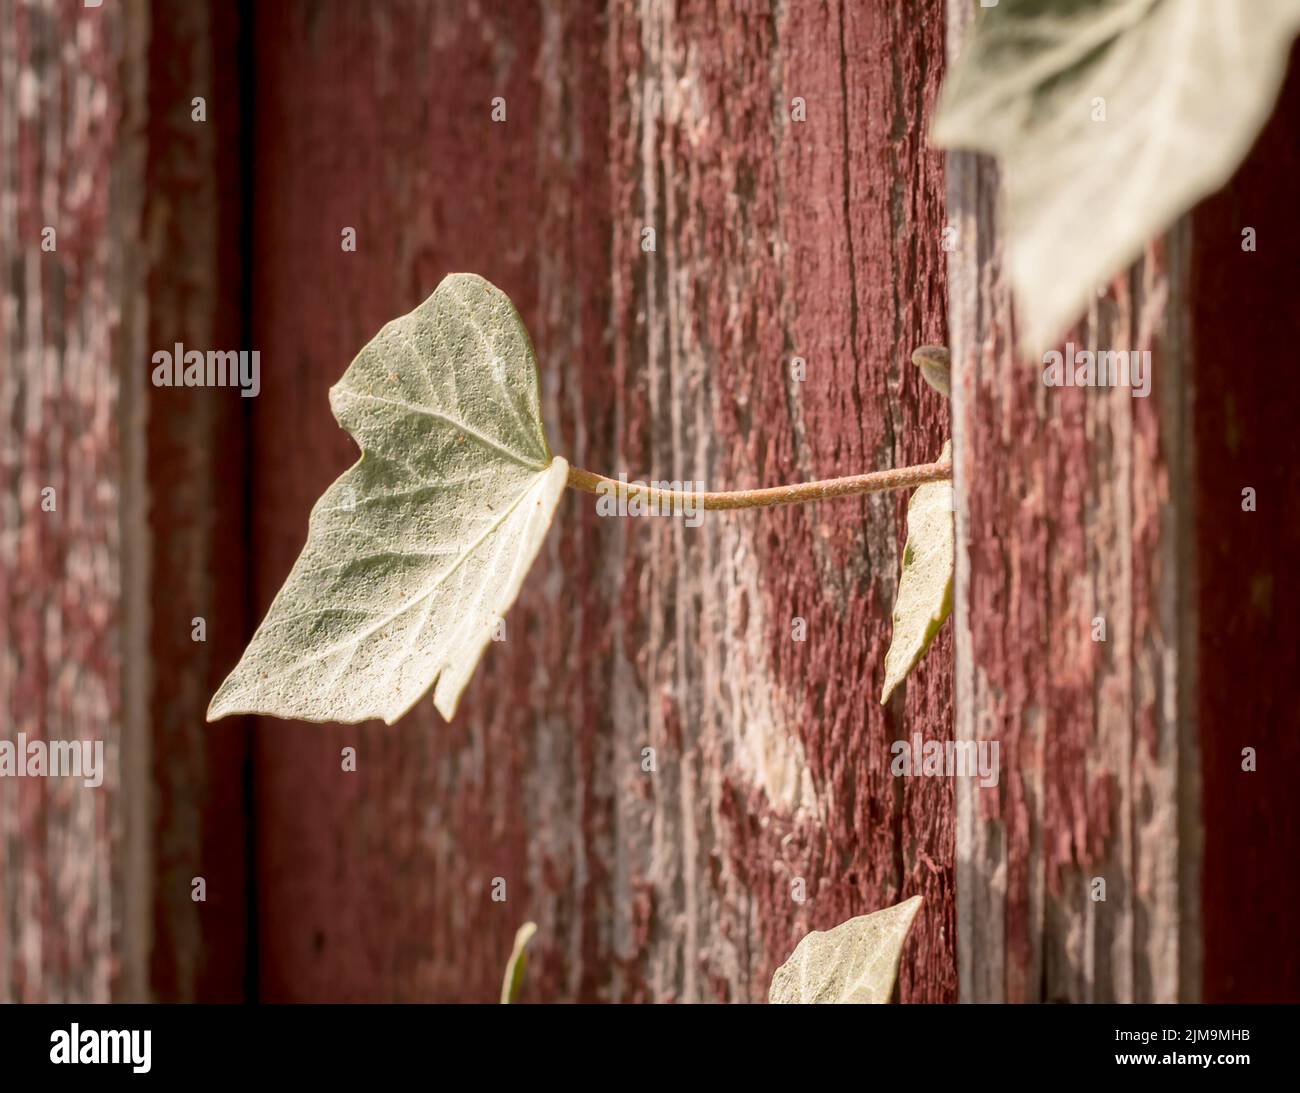 Plant leaf on a wooden wall Stock Photo